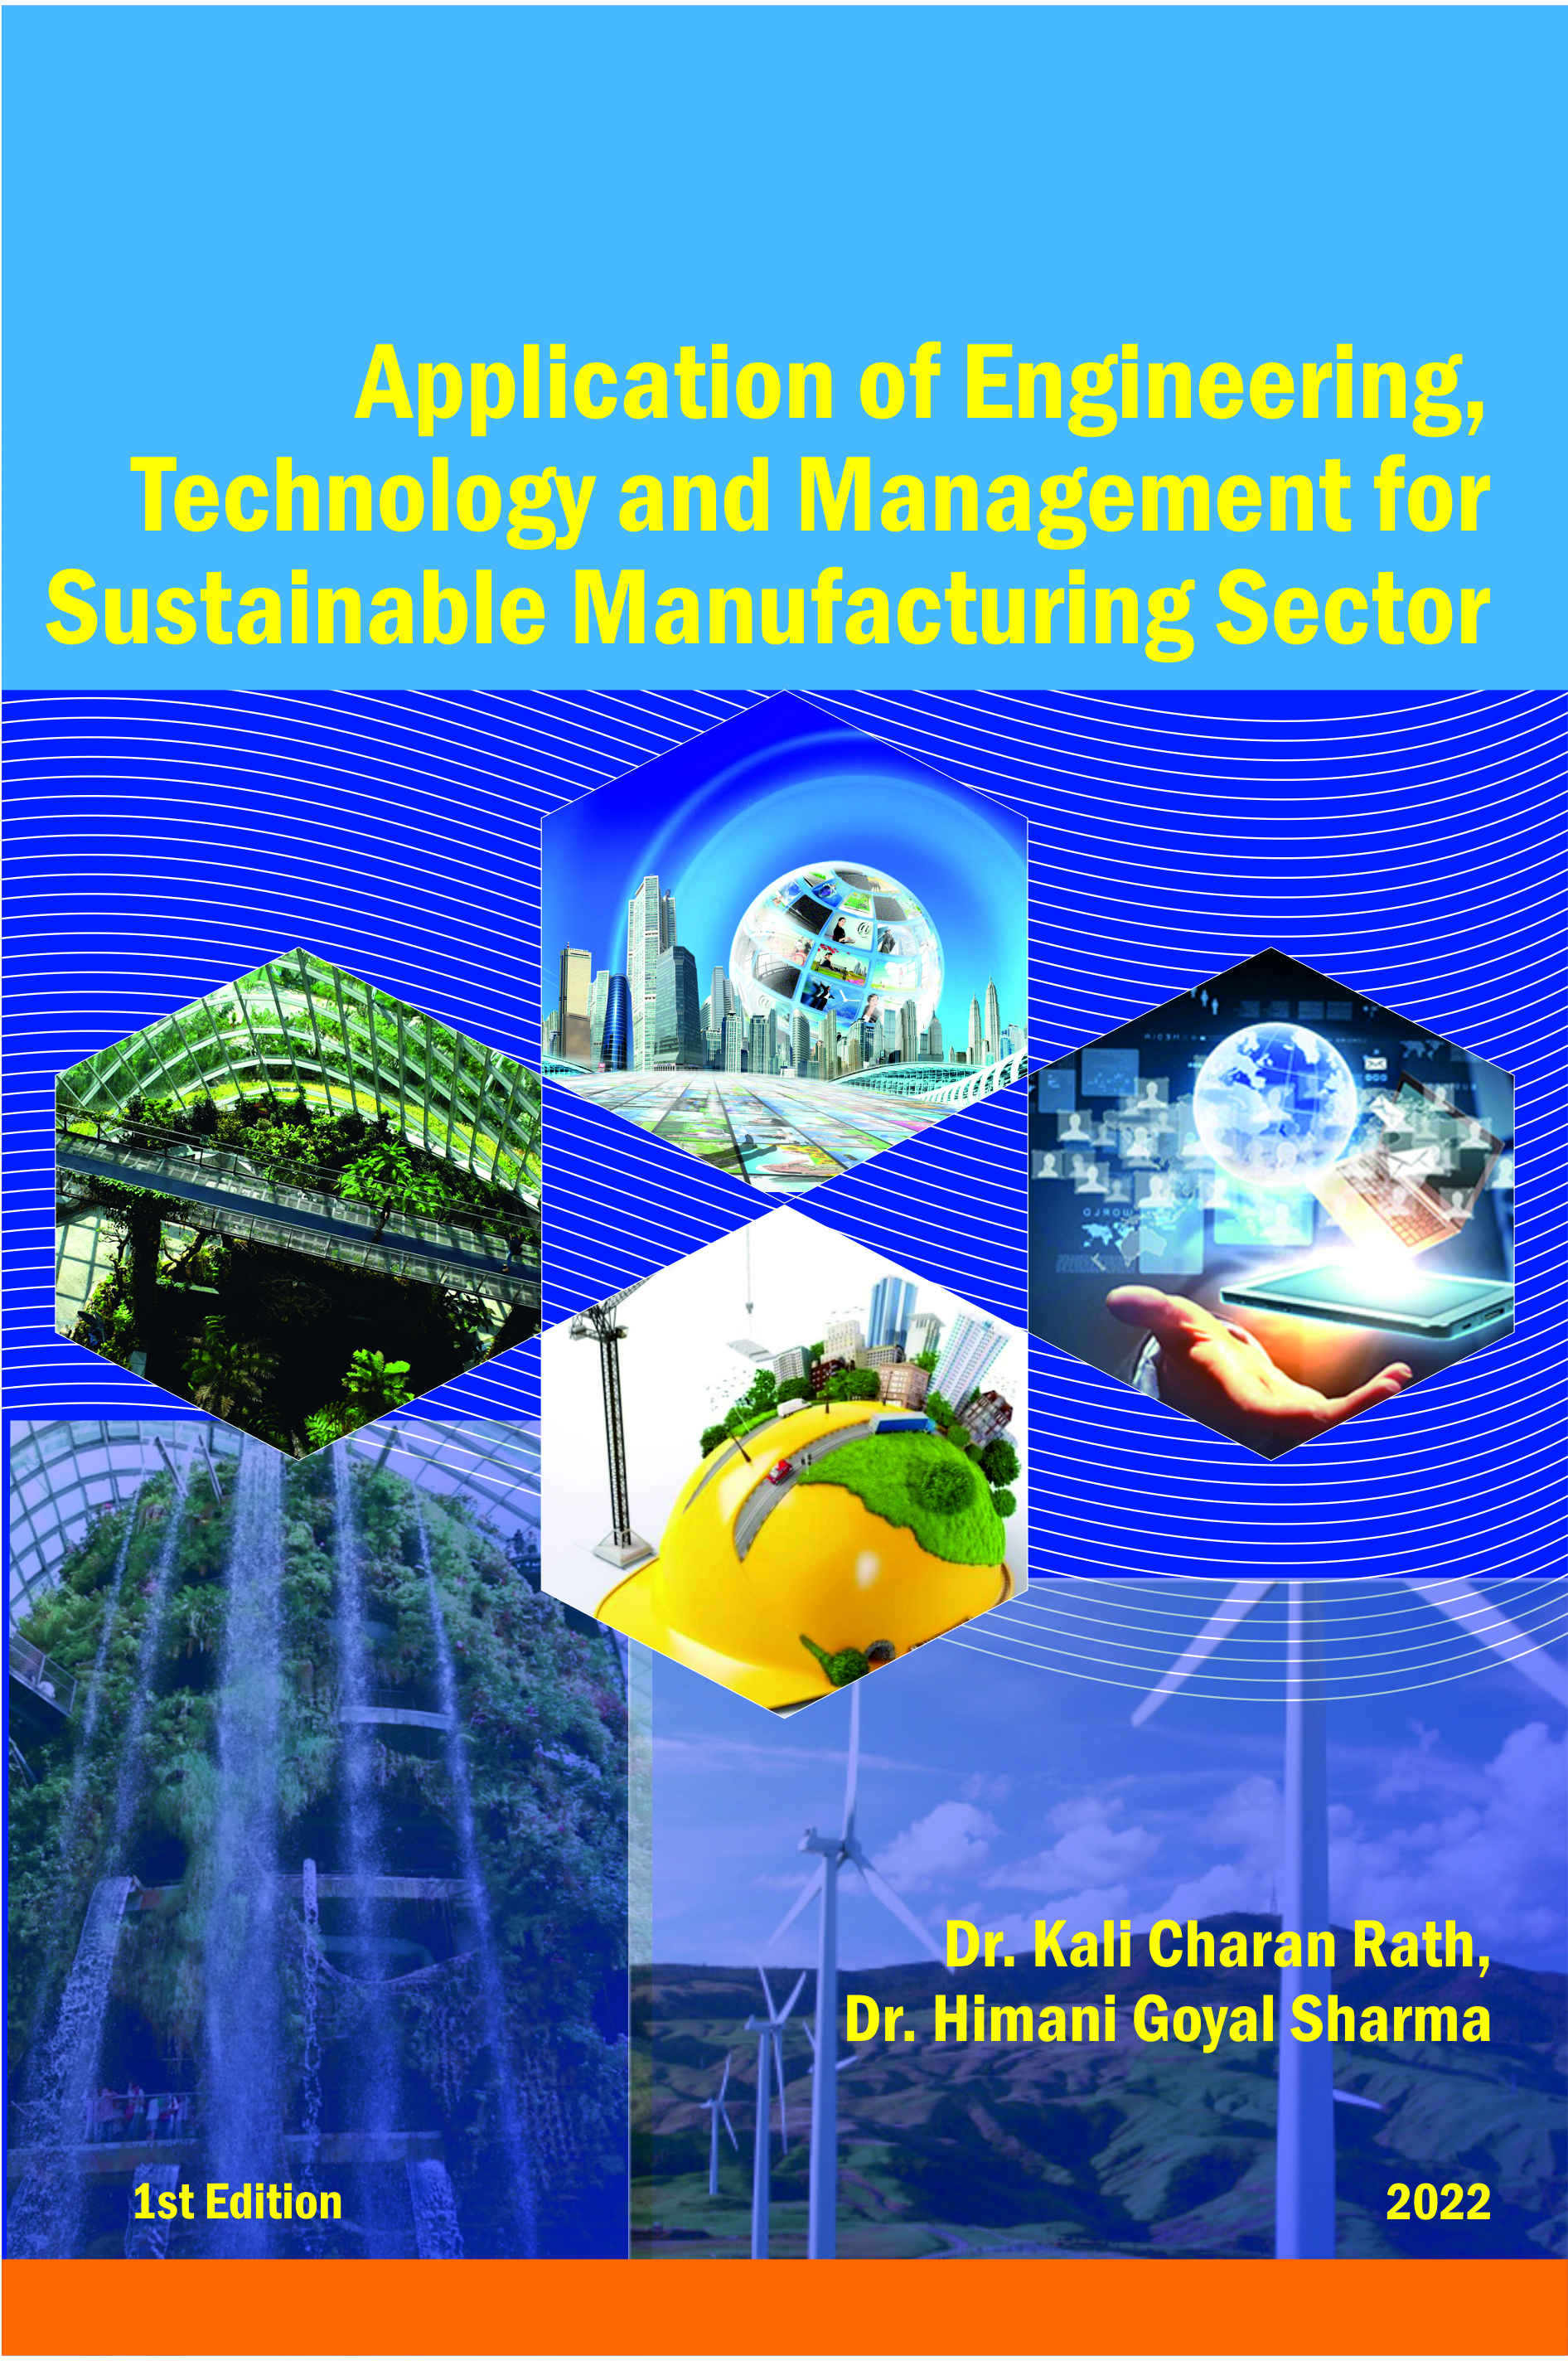 Application of Engineering, Technology, Management for  Sustainable Manufacturing Sector